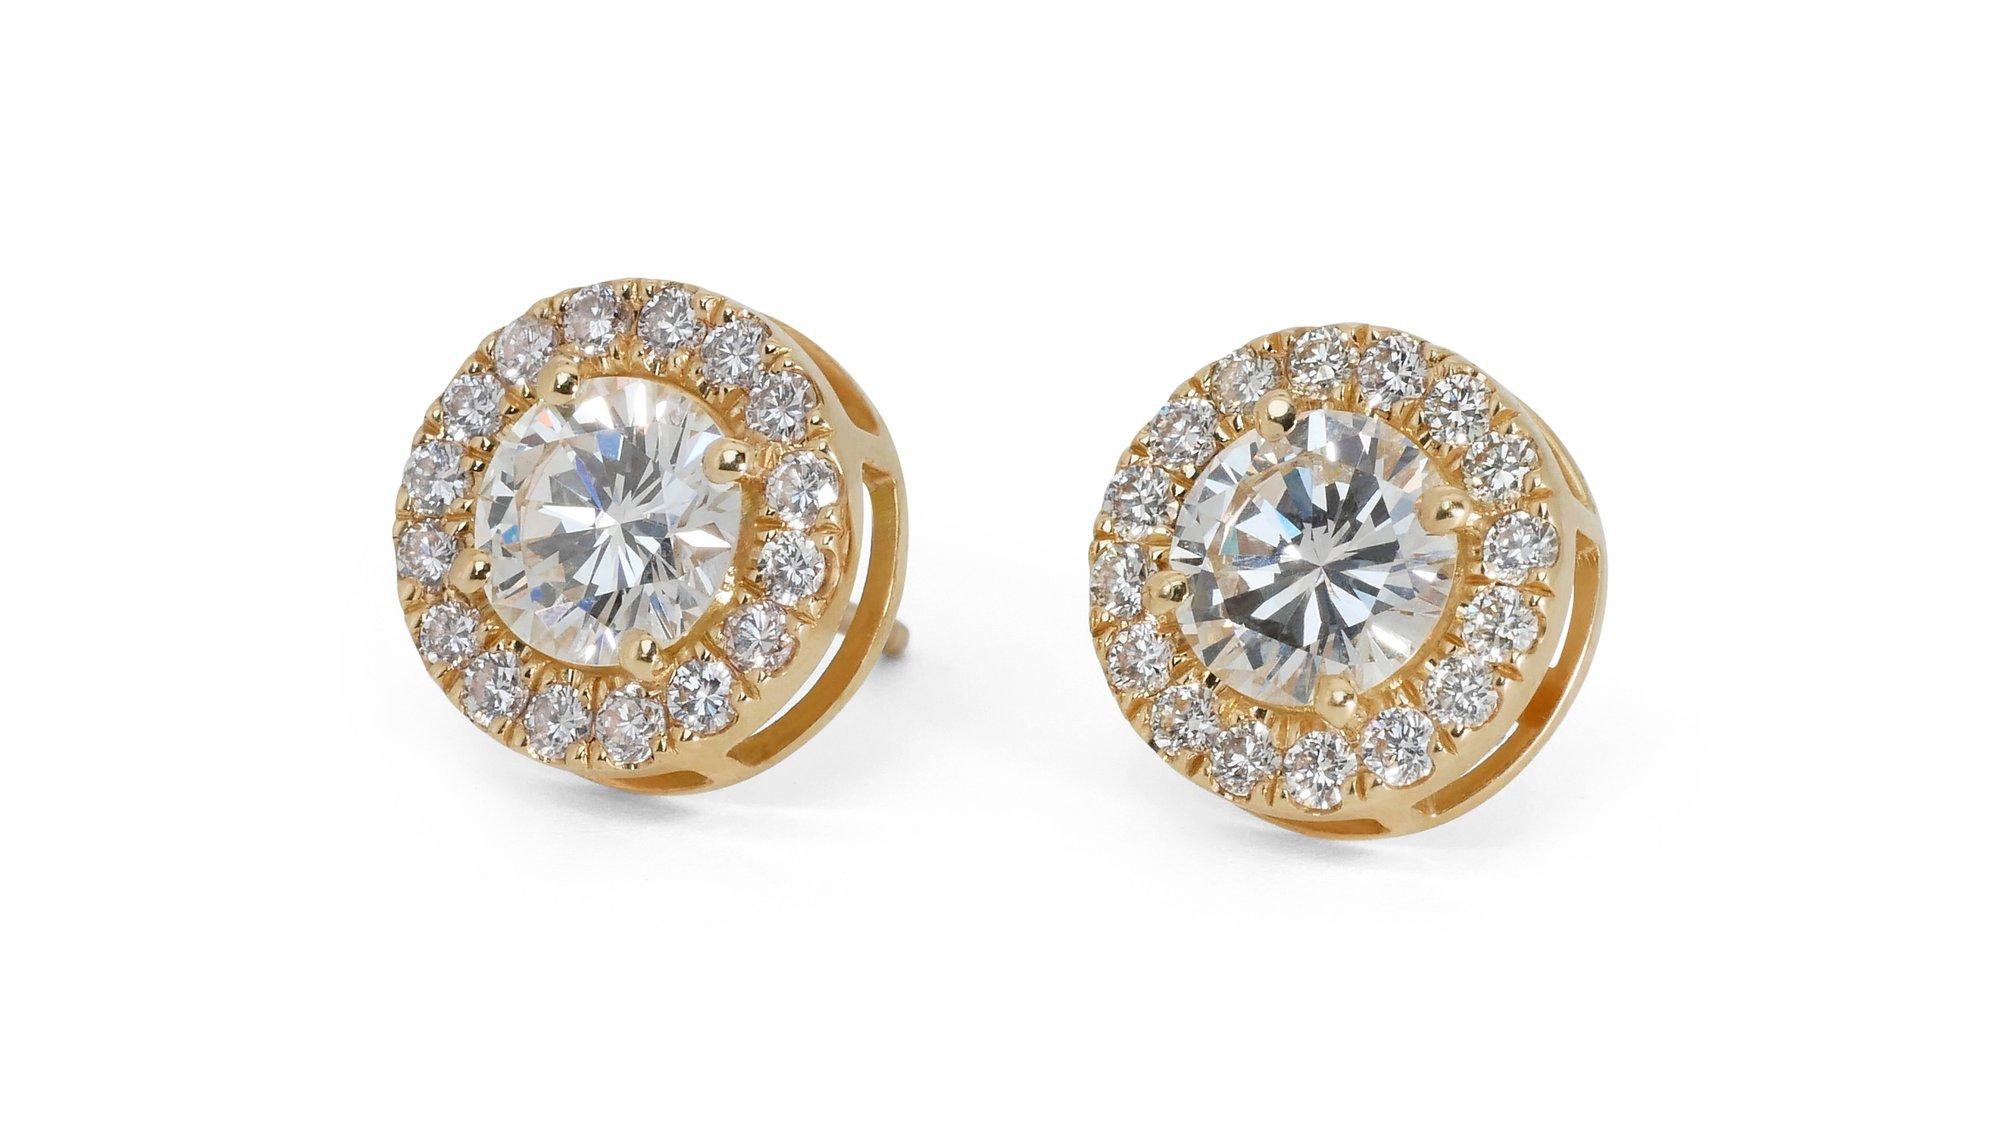 Dazzling 18k Yellow Gold Natural Diamond Halo Stud Earrings w/2.65 ct - GIA Certified

Be mesmerized by the captivating brilliance of these diamond halo stud earrings, meticulously crafted in 18k yellow gold. These stud earrings features a dazzling